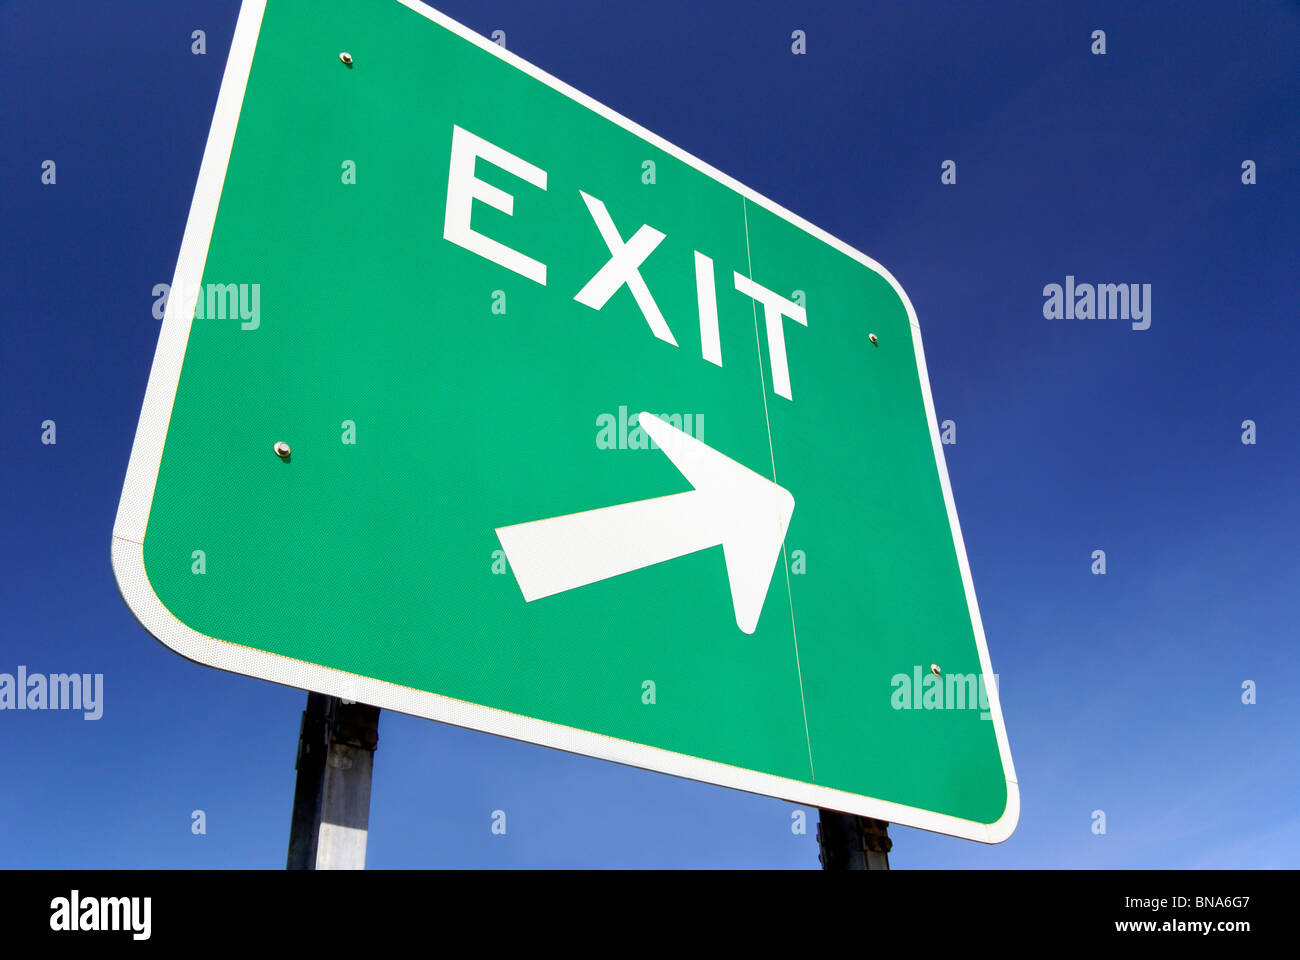 Rendered Green Highway Sign Stock Photo by ©RexWholster 539220832